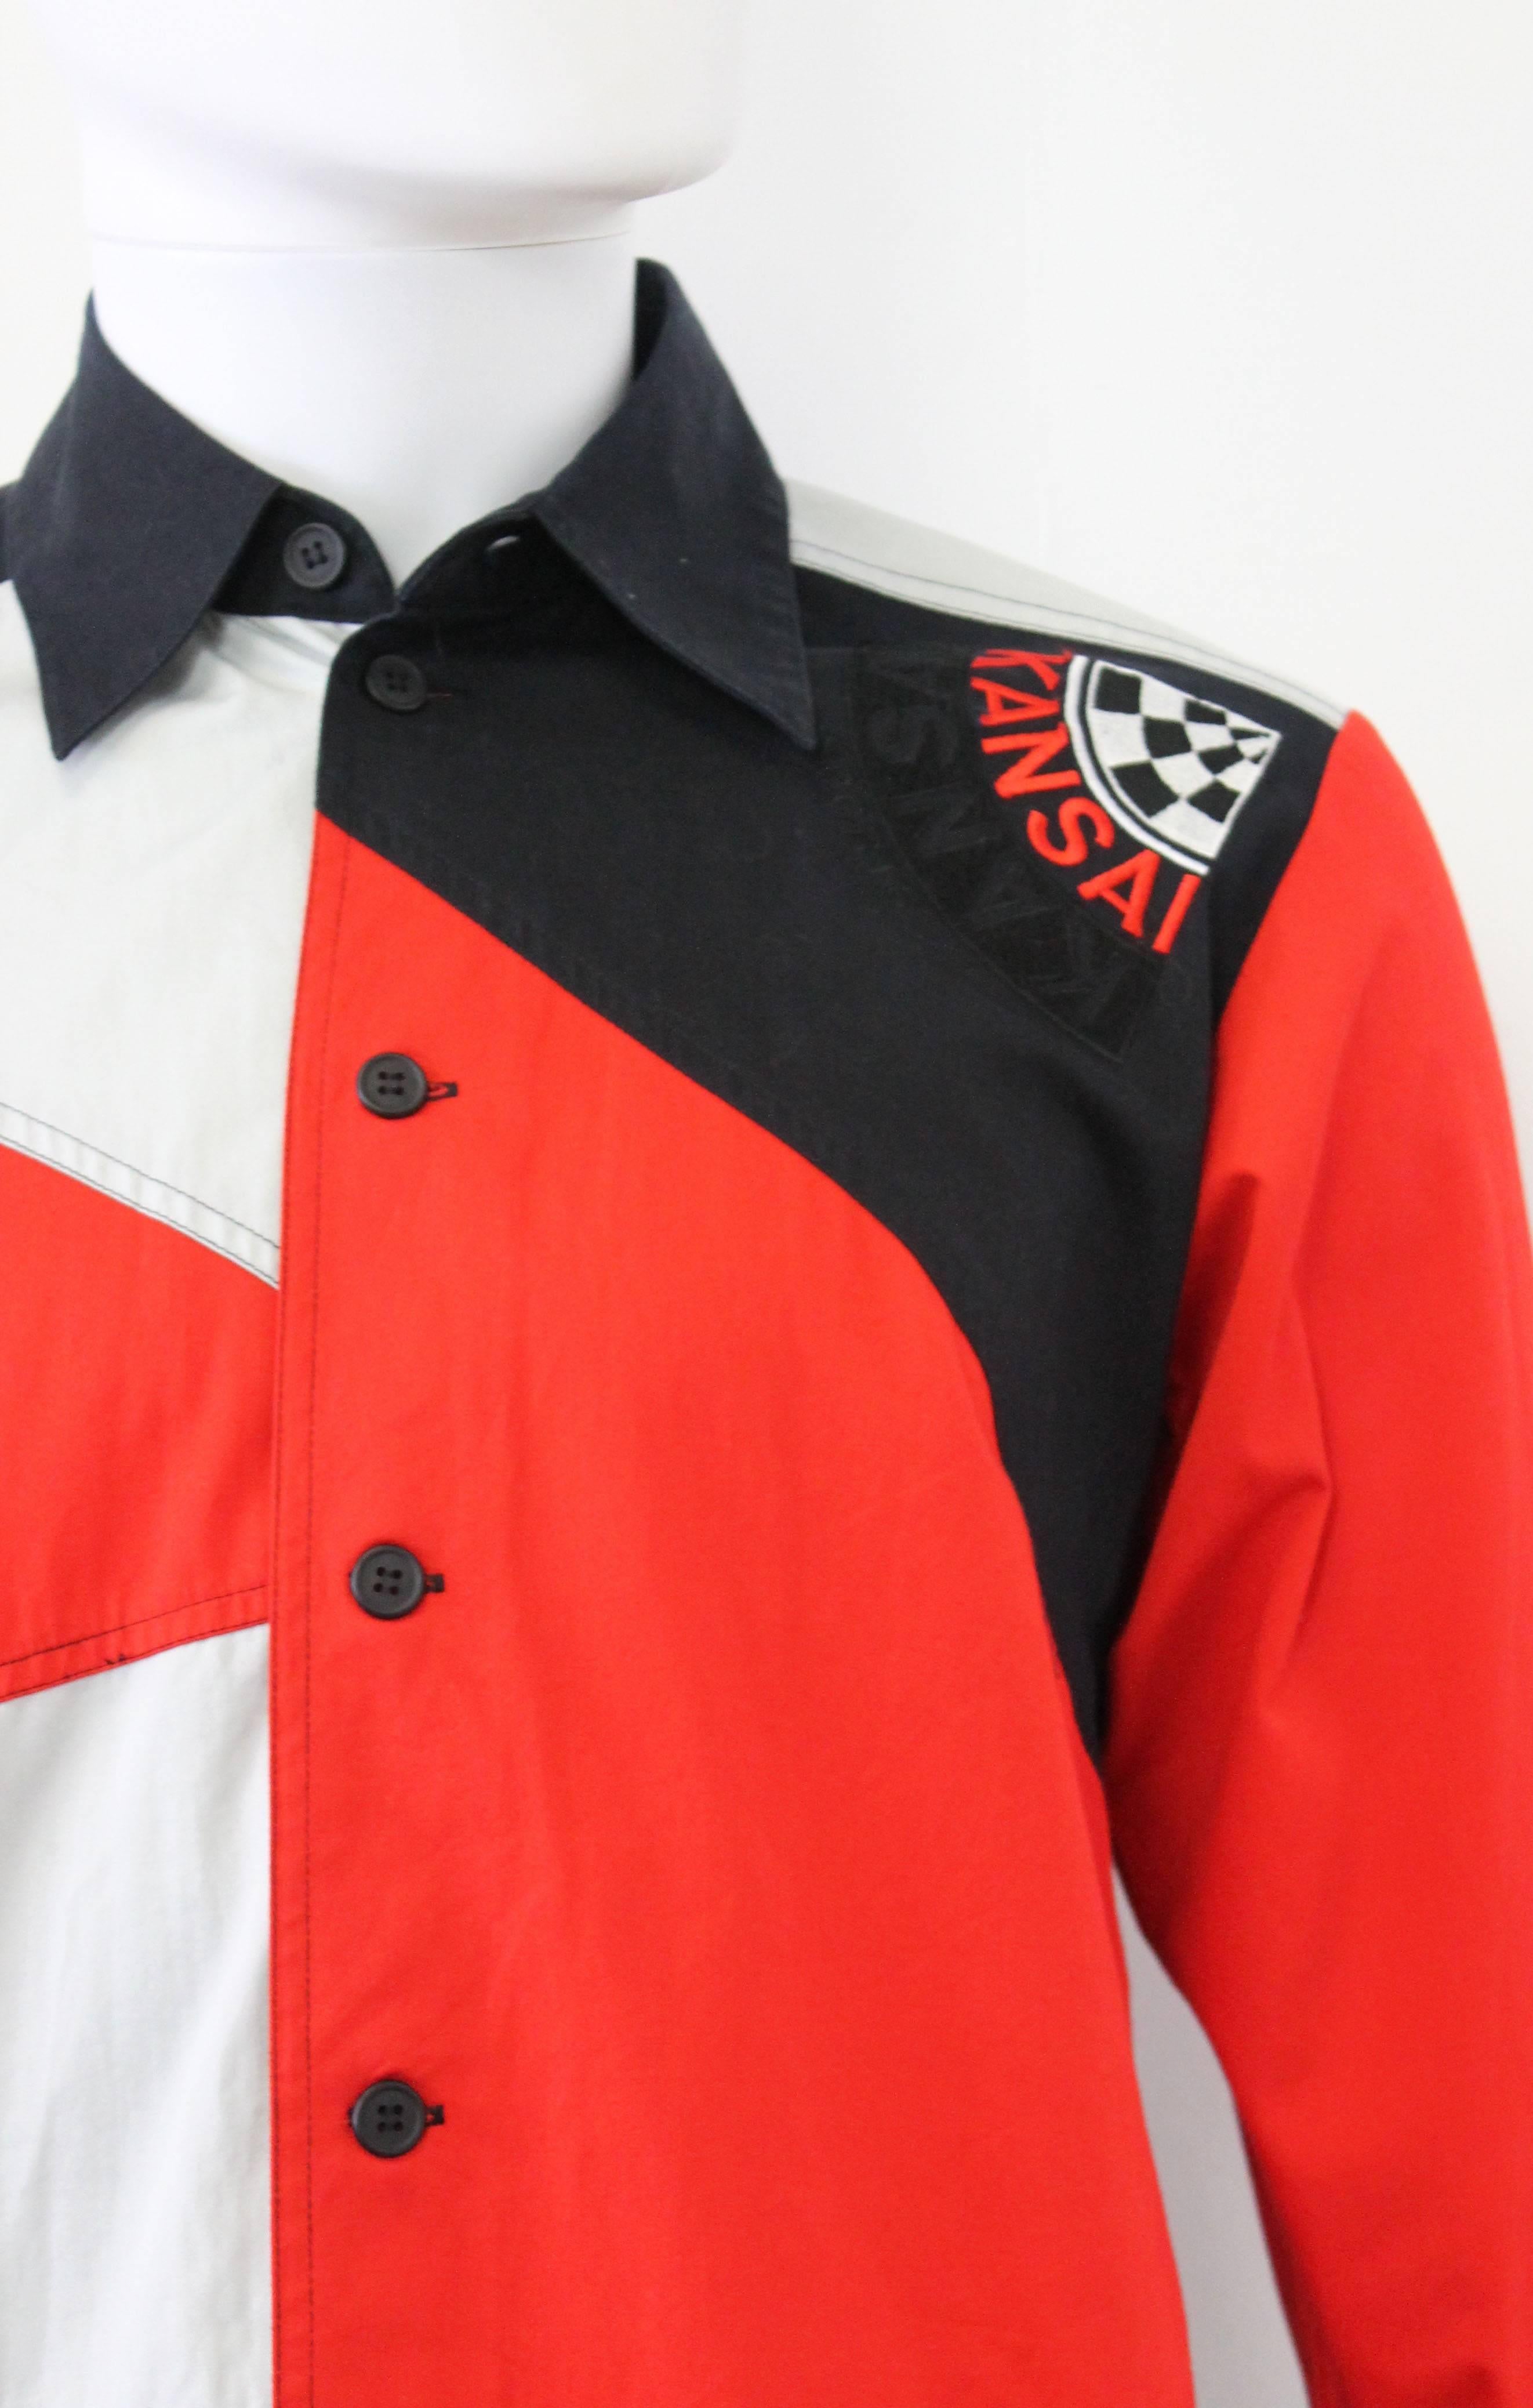 This colour block shirt dates back to the late 80s, early 90s. The shirt is constructed from white, red and navy triangular shapes and embroidered with the ‘Kansai Sports’ logo on the pocket and back. This shirt would look equally as good on a